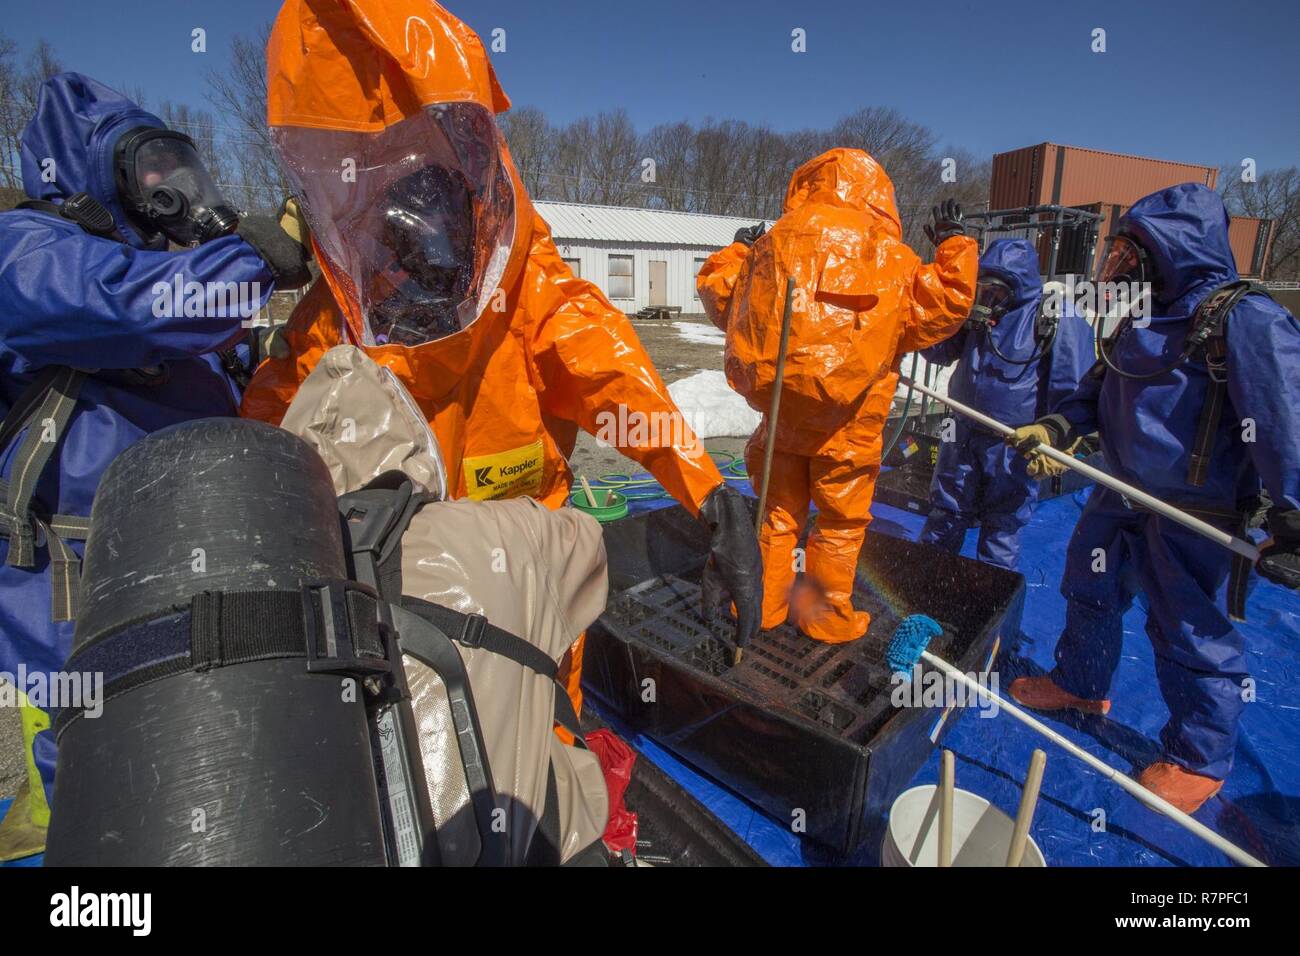 Strike Team members Sgt. Joe Bercovic, second from left, and Staff Sgt. Nicky Lam, center, both with the New Jersey National Guard's 21st Weapons of Mass Destruction-Civil Support Team, are decontaminated by Picatinny Arsenal firefighters during a training exercise with the Picatinny Arsenal Fire Department at the New Jersey Homeland Defense Homeland Security Center at Picatinny Arsenal, N.J., Mar. 23, 2017. The 21st WMD-CST is a joint unit comprised of New Jersey National Guard Soldiers and Airmen whose mission is to support civil authorities by identifying chemical, biological, radiological, Stock Photo